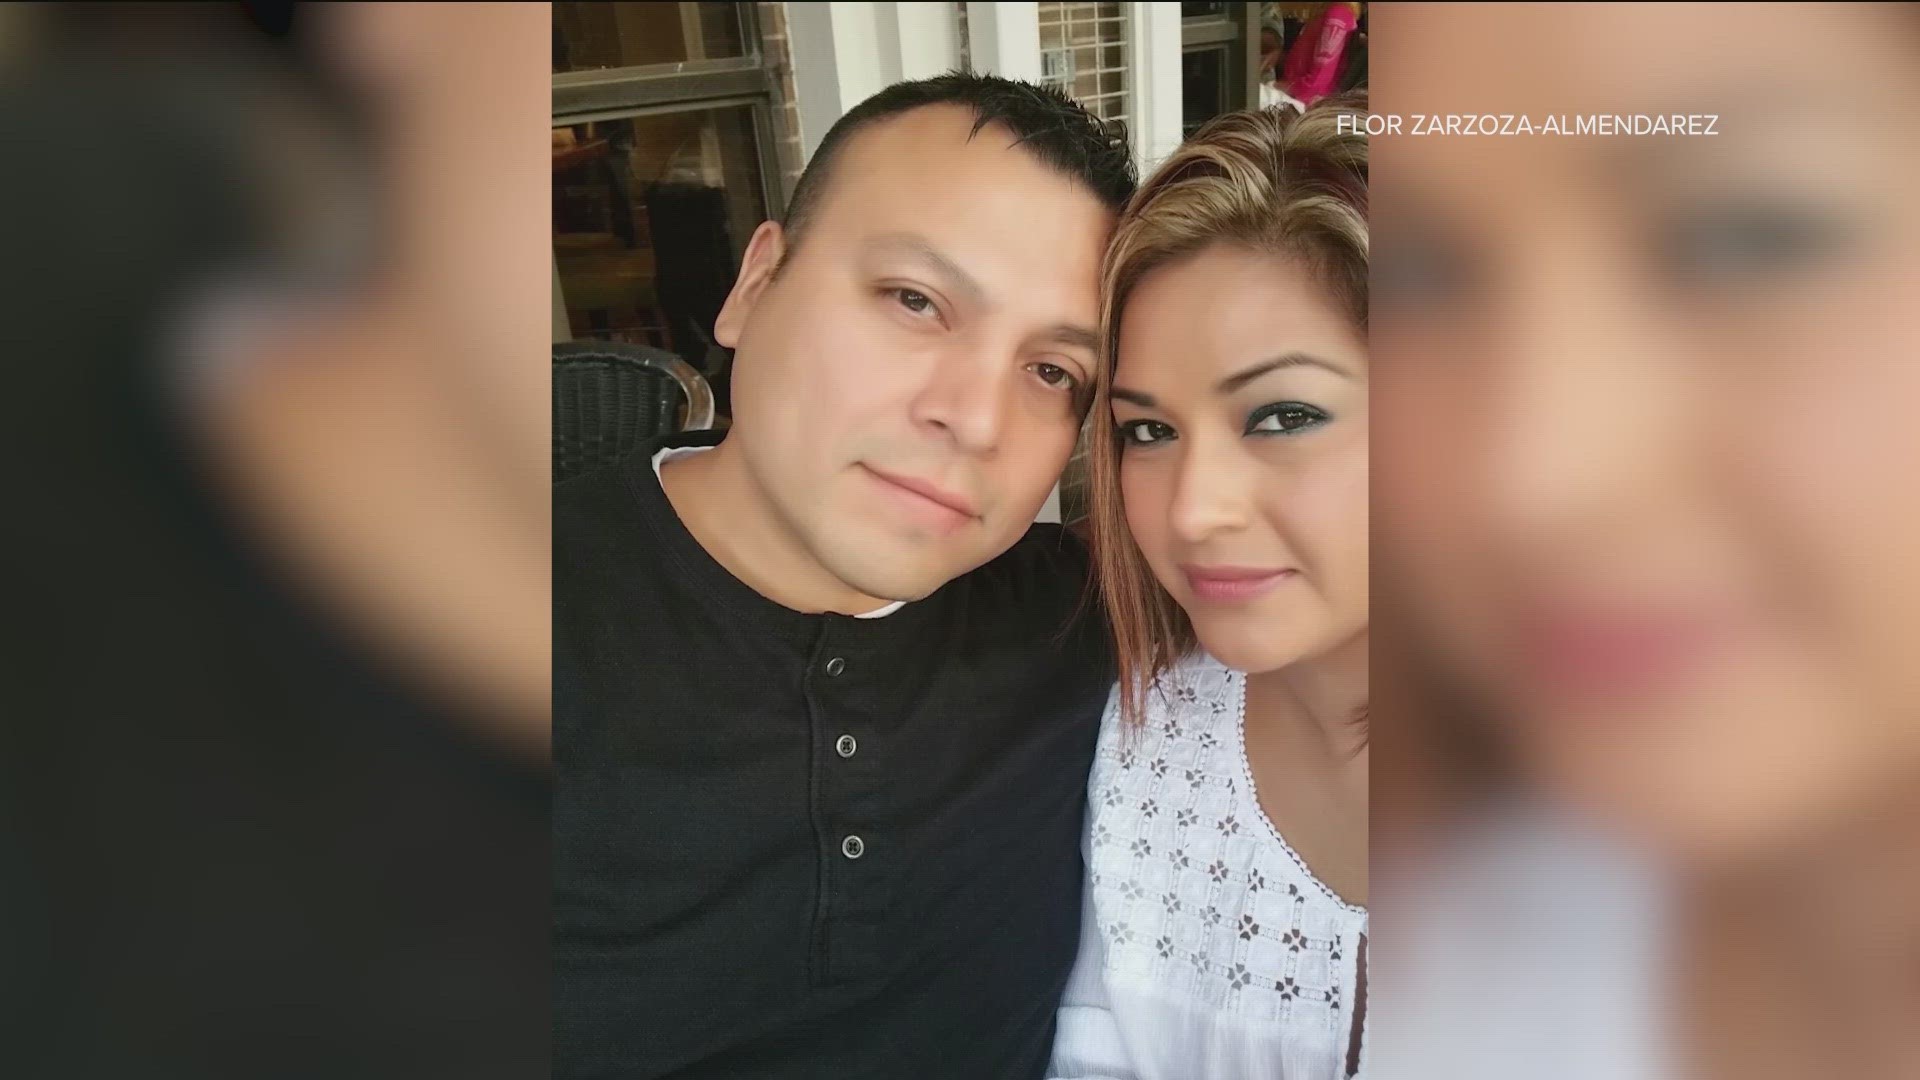 Harris County Deputy Darren Almendarez was shot and killed after three men attempted to steal a catalytic converter from his truck.